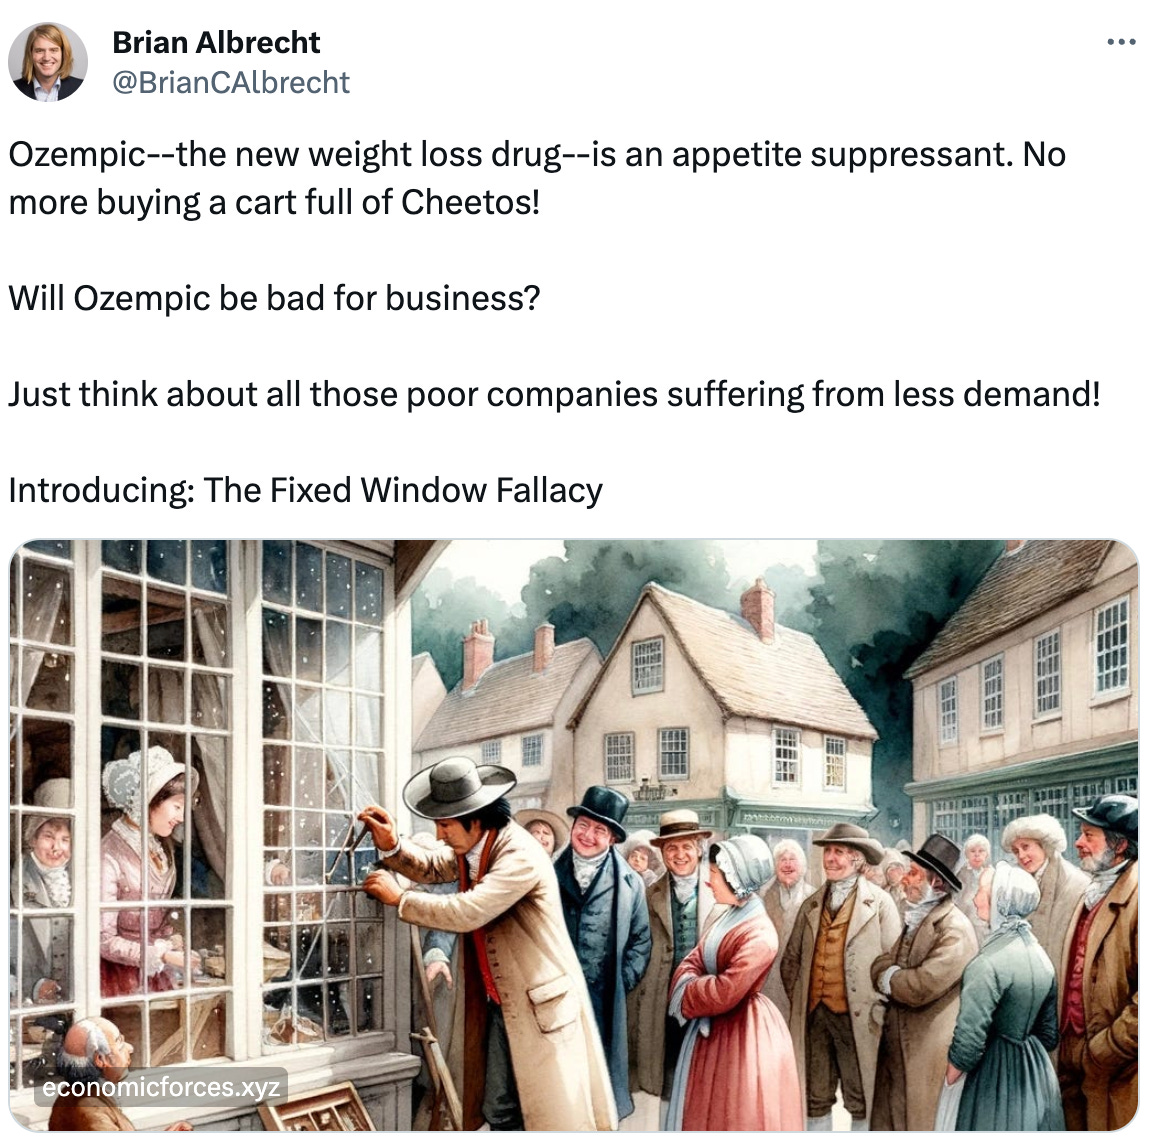  See new posts Conversation Brian Albrecht @BrianCAlbrecht Ozempic--the new weight loss drug--is an appetite suppressant. No more buying a cart full of Cheetos!  Will Ozempic be bad for business?   Just think about all those poor companies suffering from less demand!  Introducing: The Fixed Window Fallacy